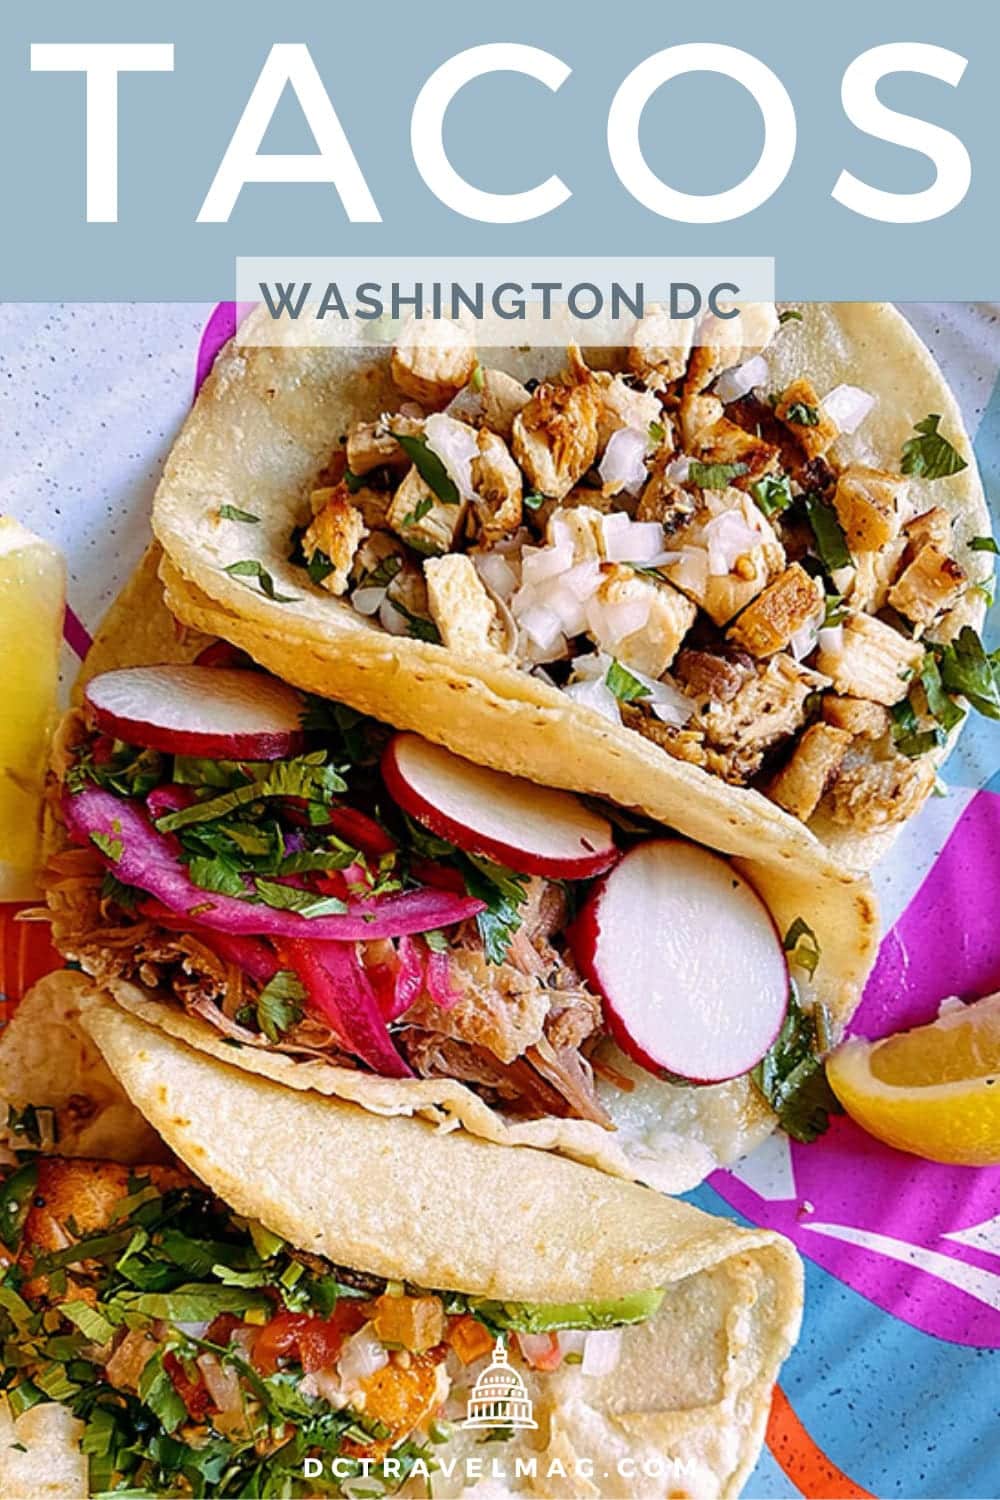 Best Tacos in Washington DC- photo credit Keryn Means publisher of DCTravelMag.com